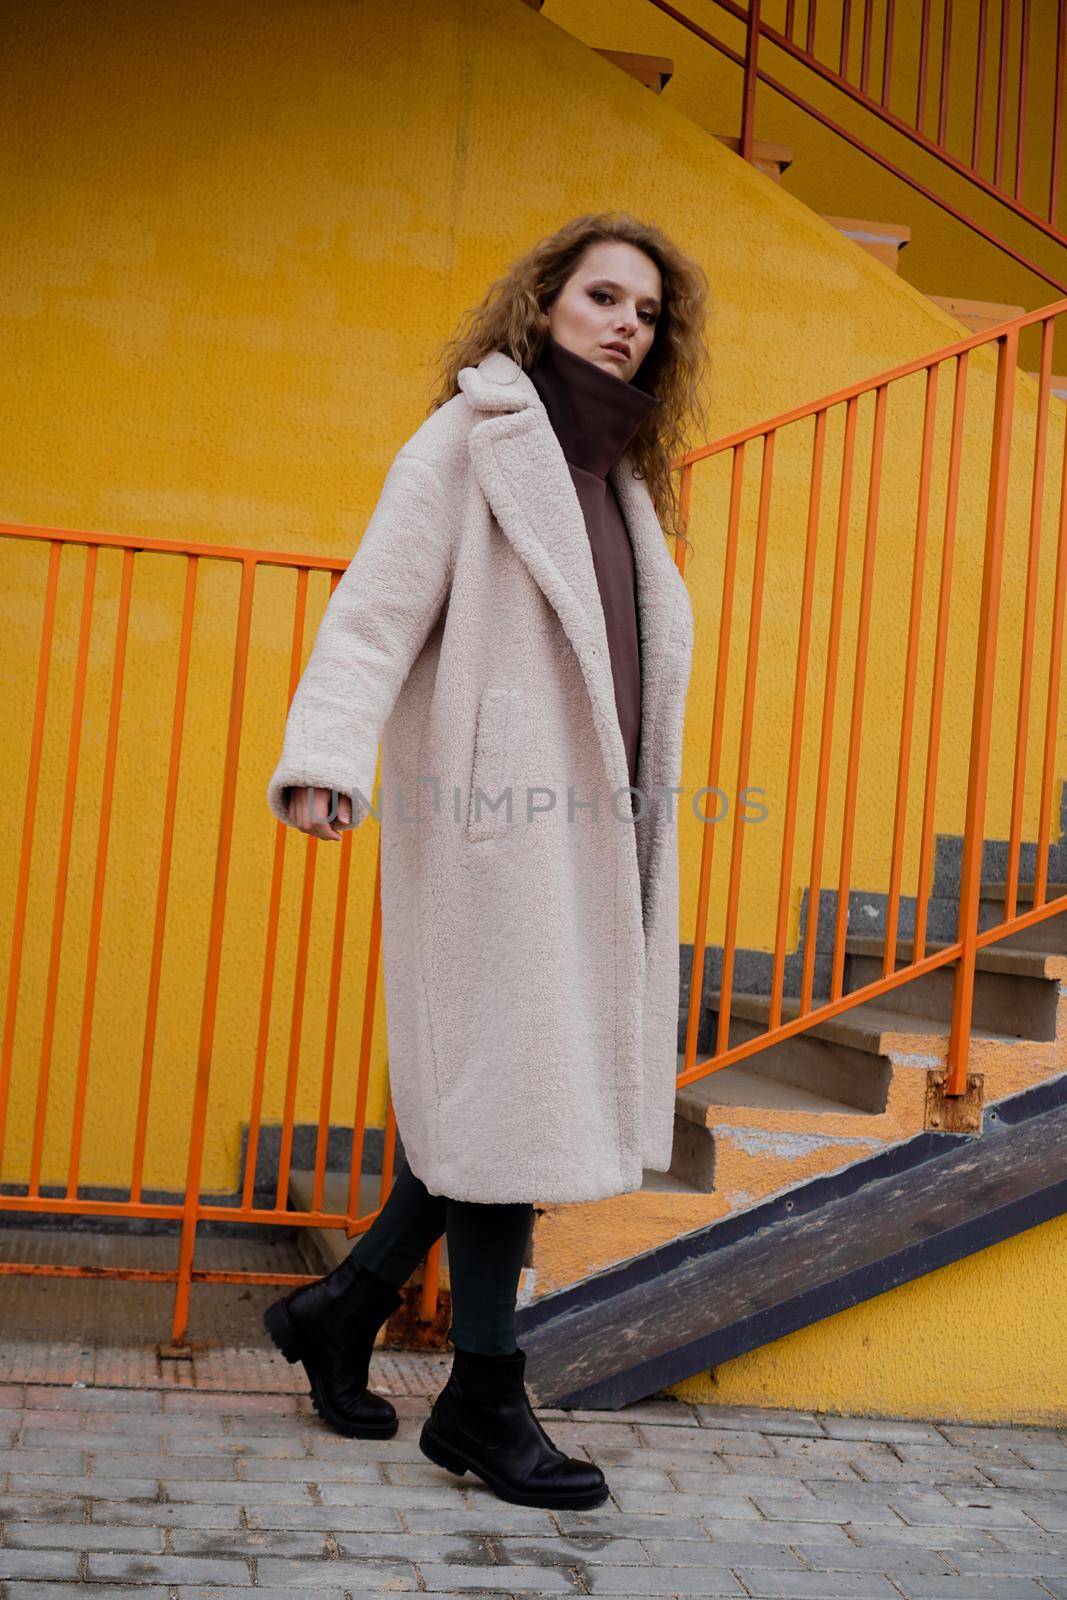 A girl with red curly hair in a white coat poses on the yellow parking stairs by natali_brill